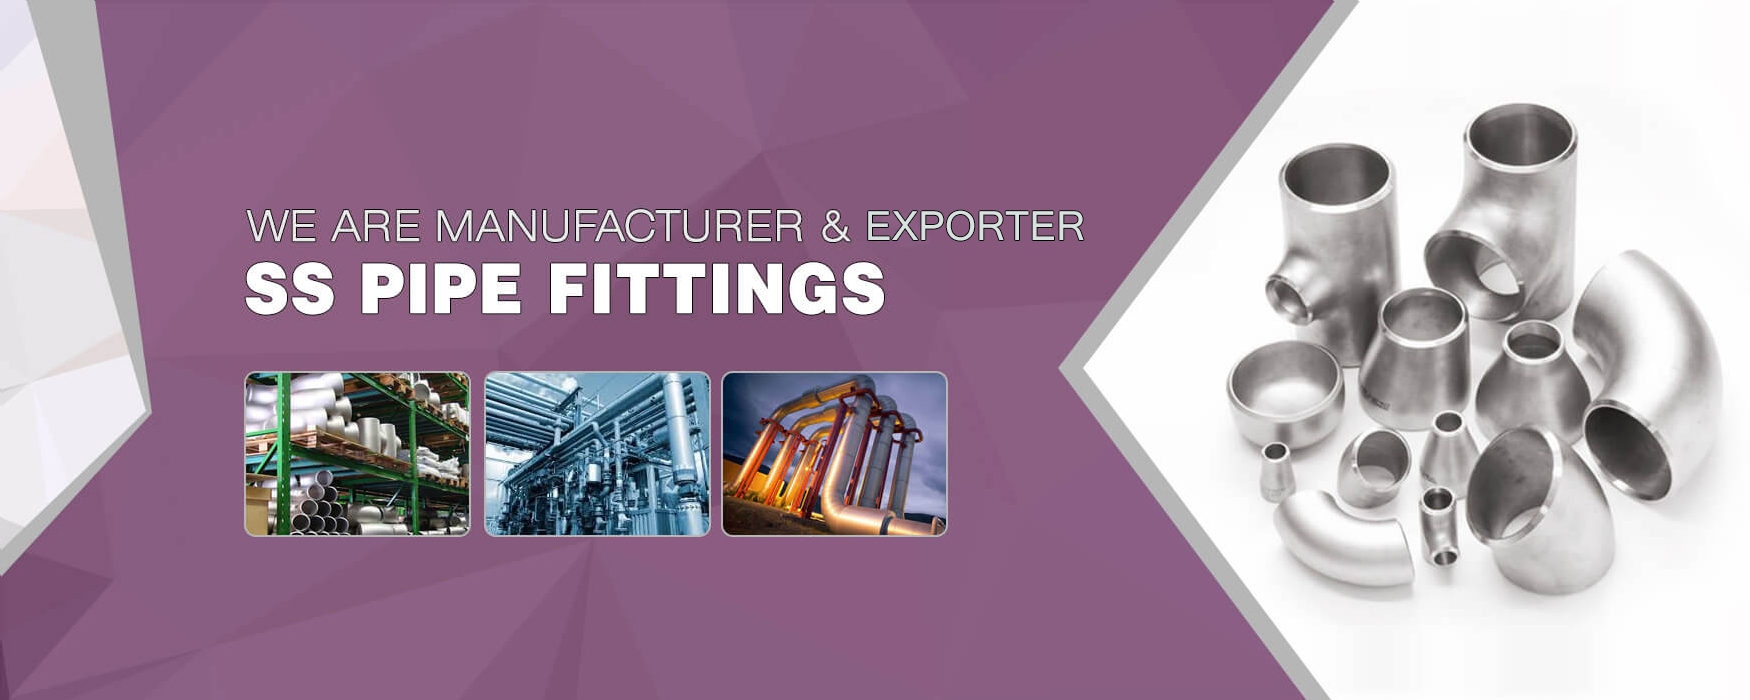 ss-pipe-fittings-manufacturer-exporter